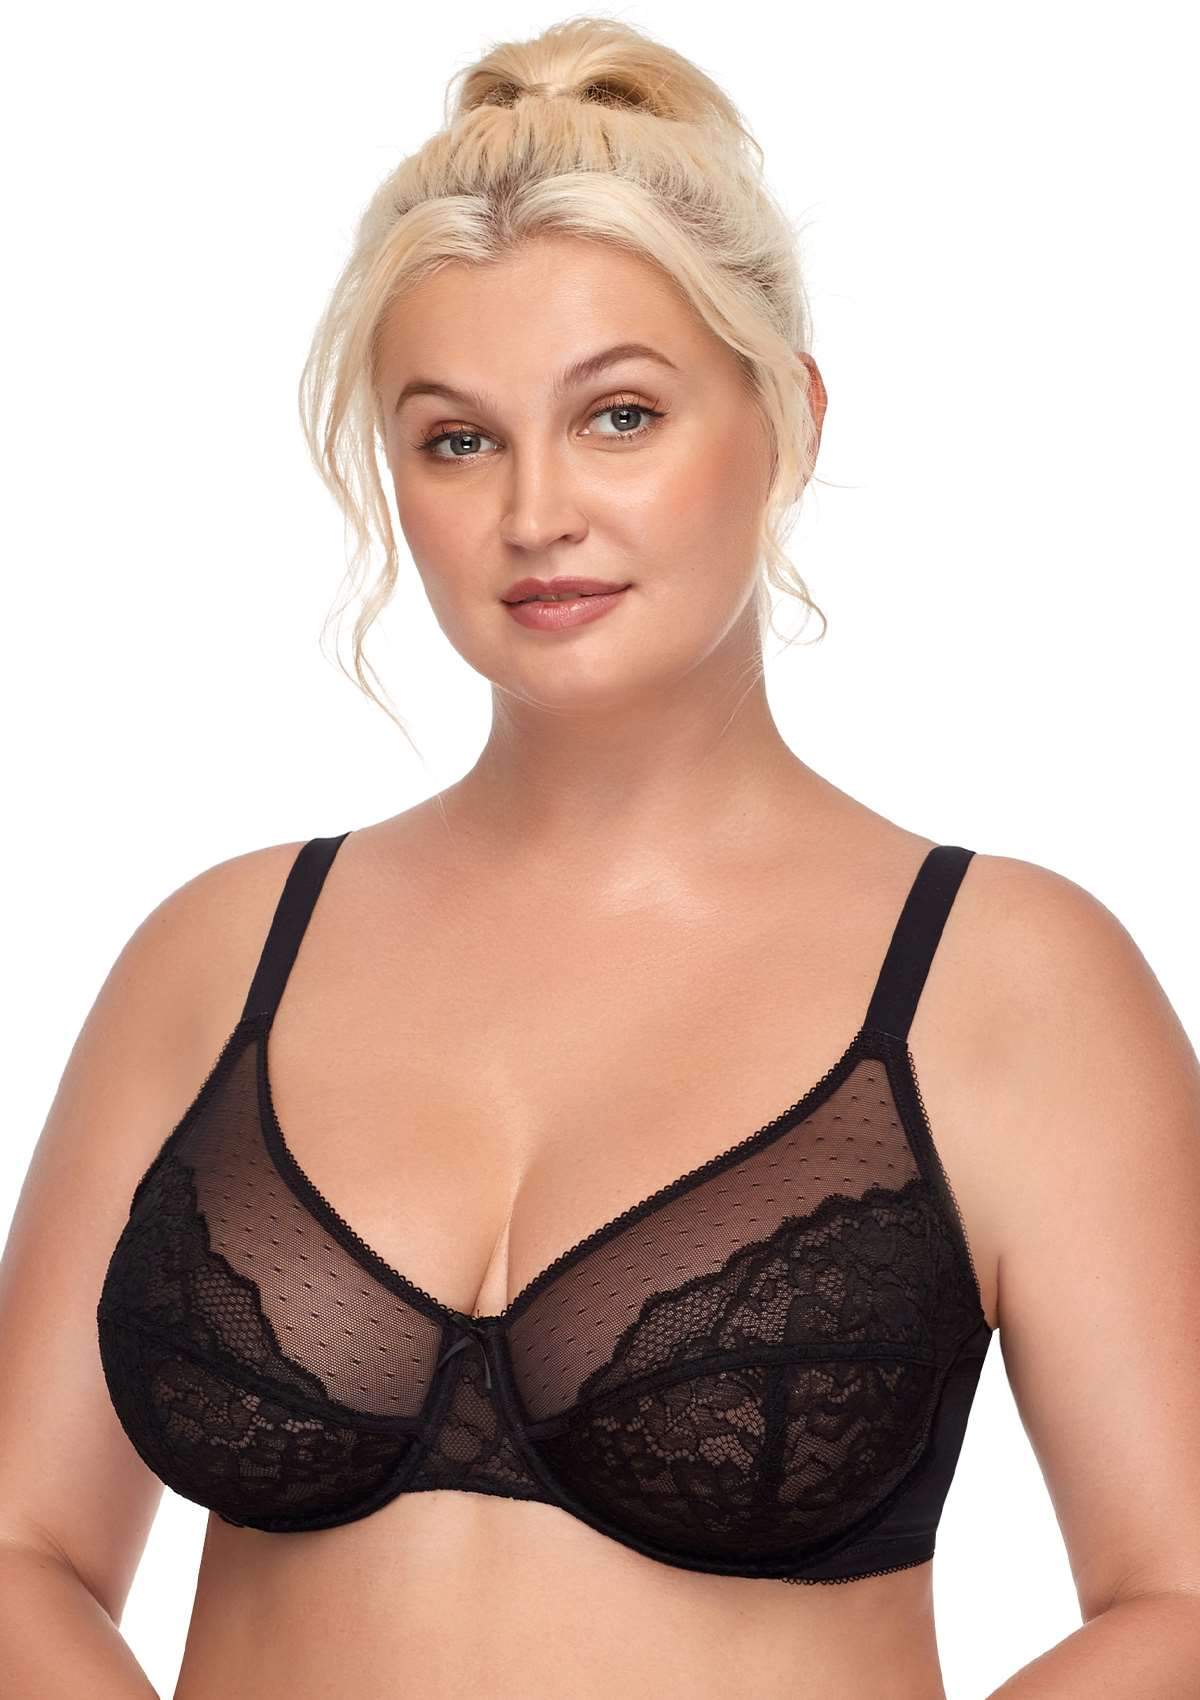 HSIA Enchante Lace Wire Bra For Lifting And Separating Large Breasts - Black / 44 / DDD/F